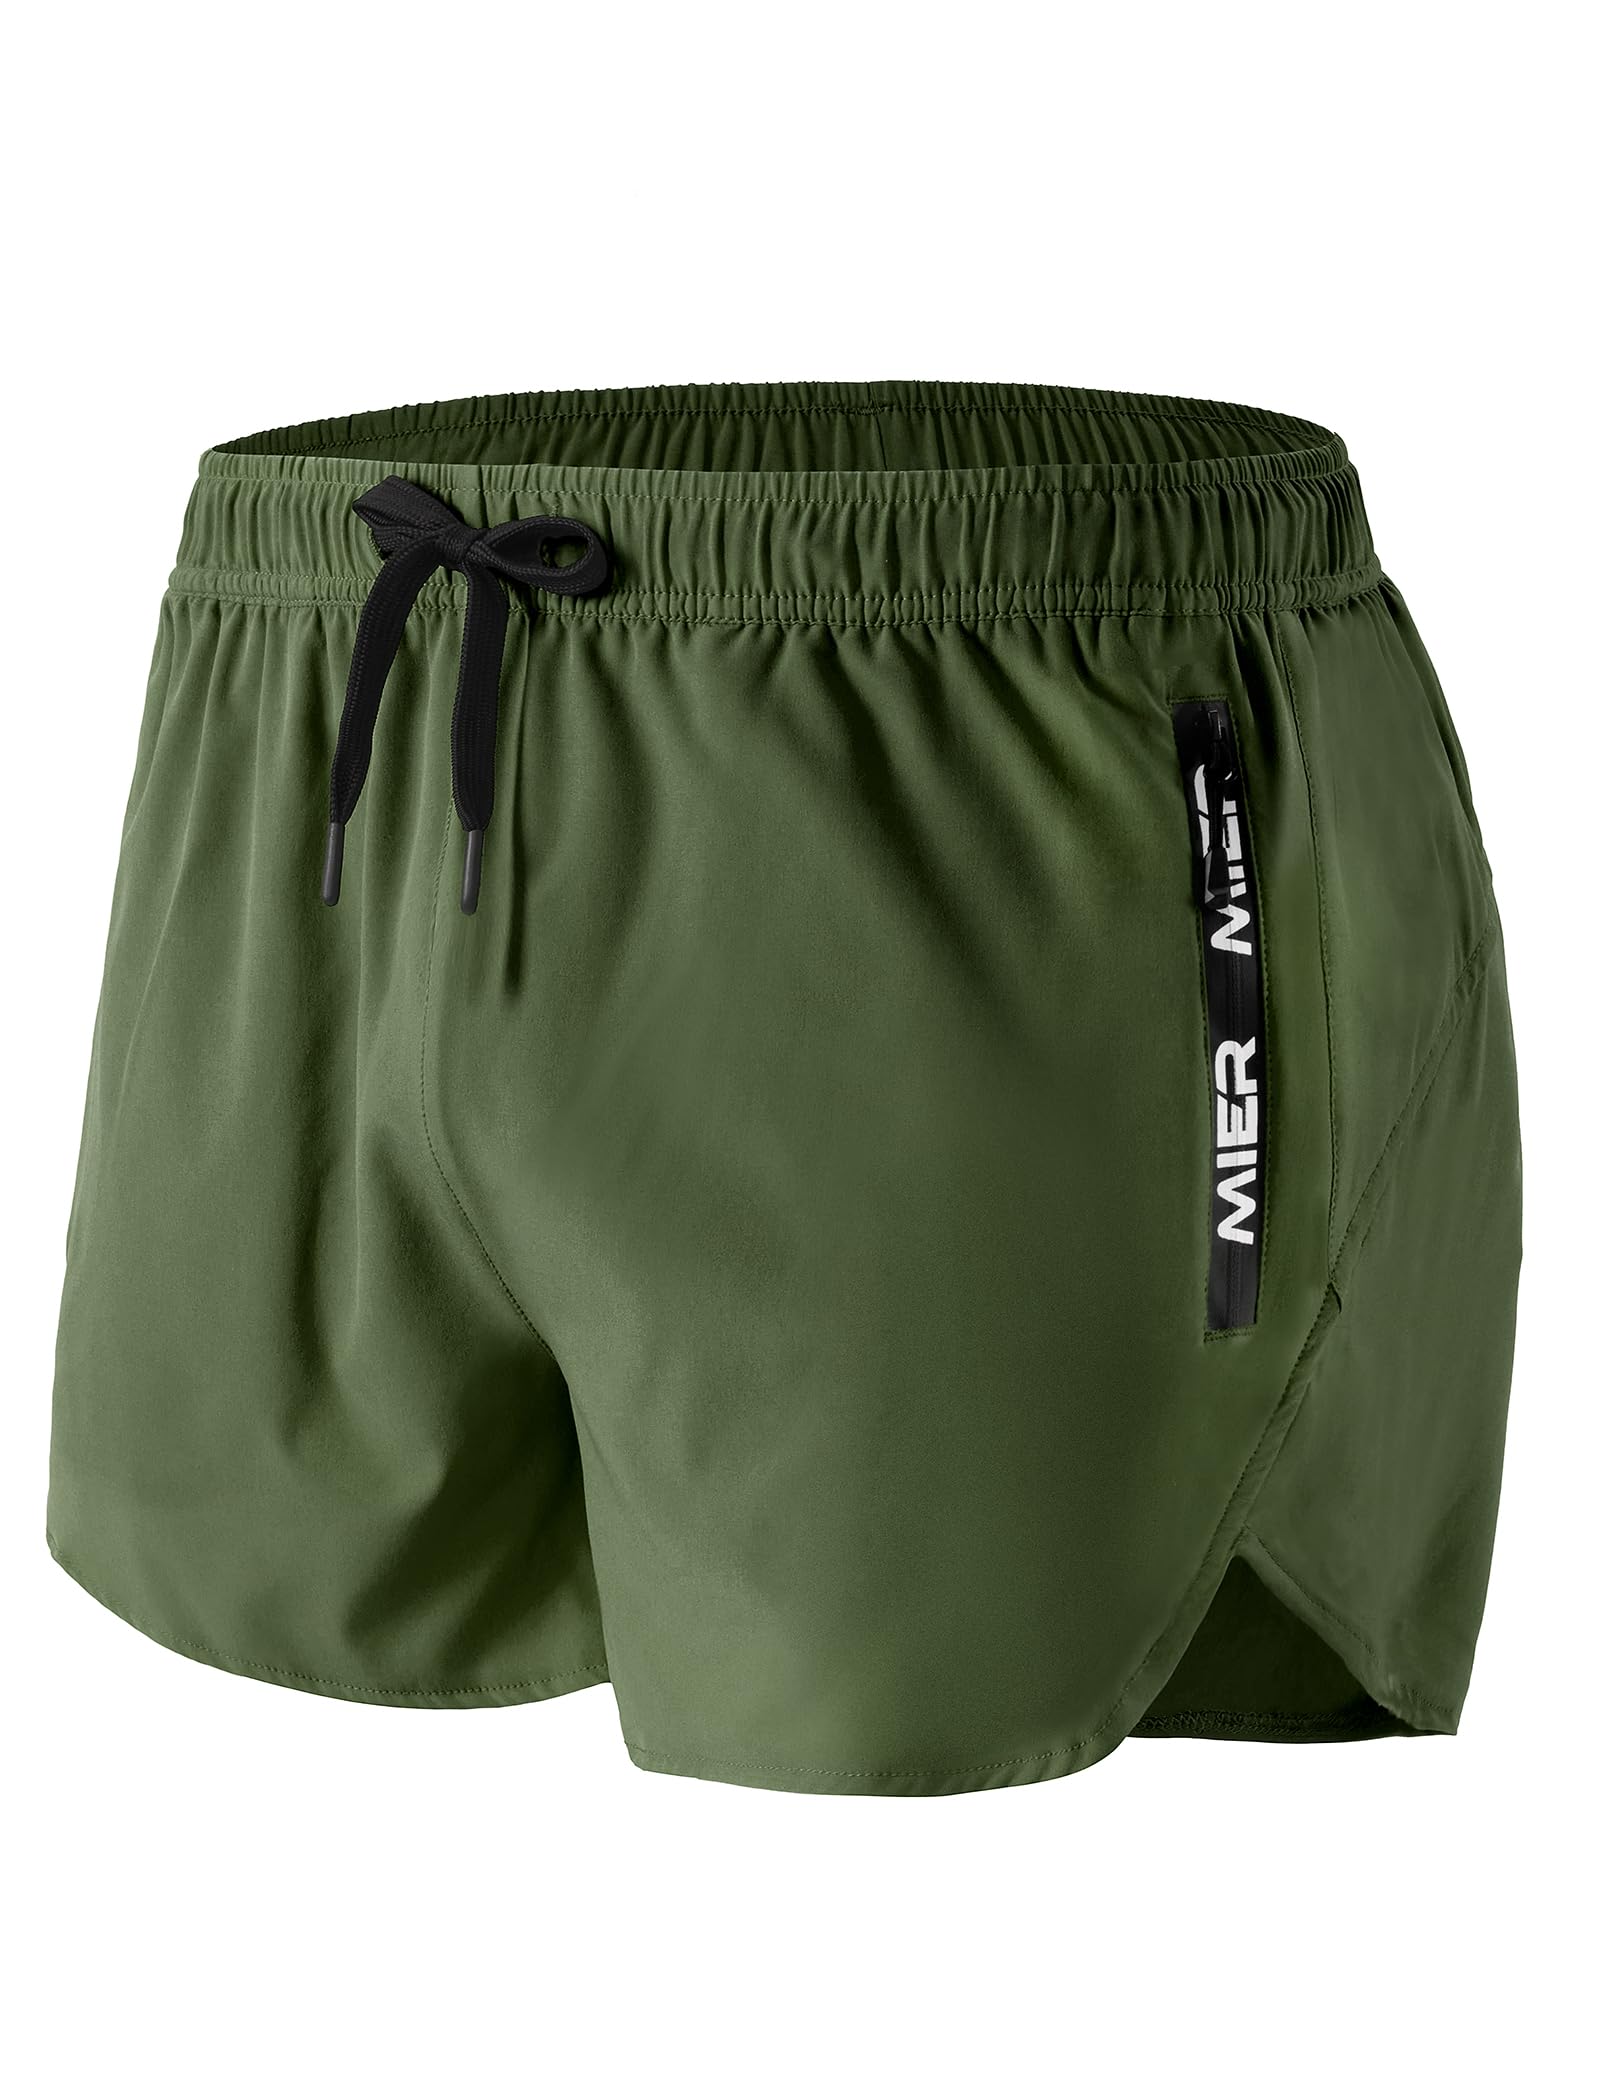 Men's 3 Inch Dry Fit Running Shorts with Brief Liner